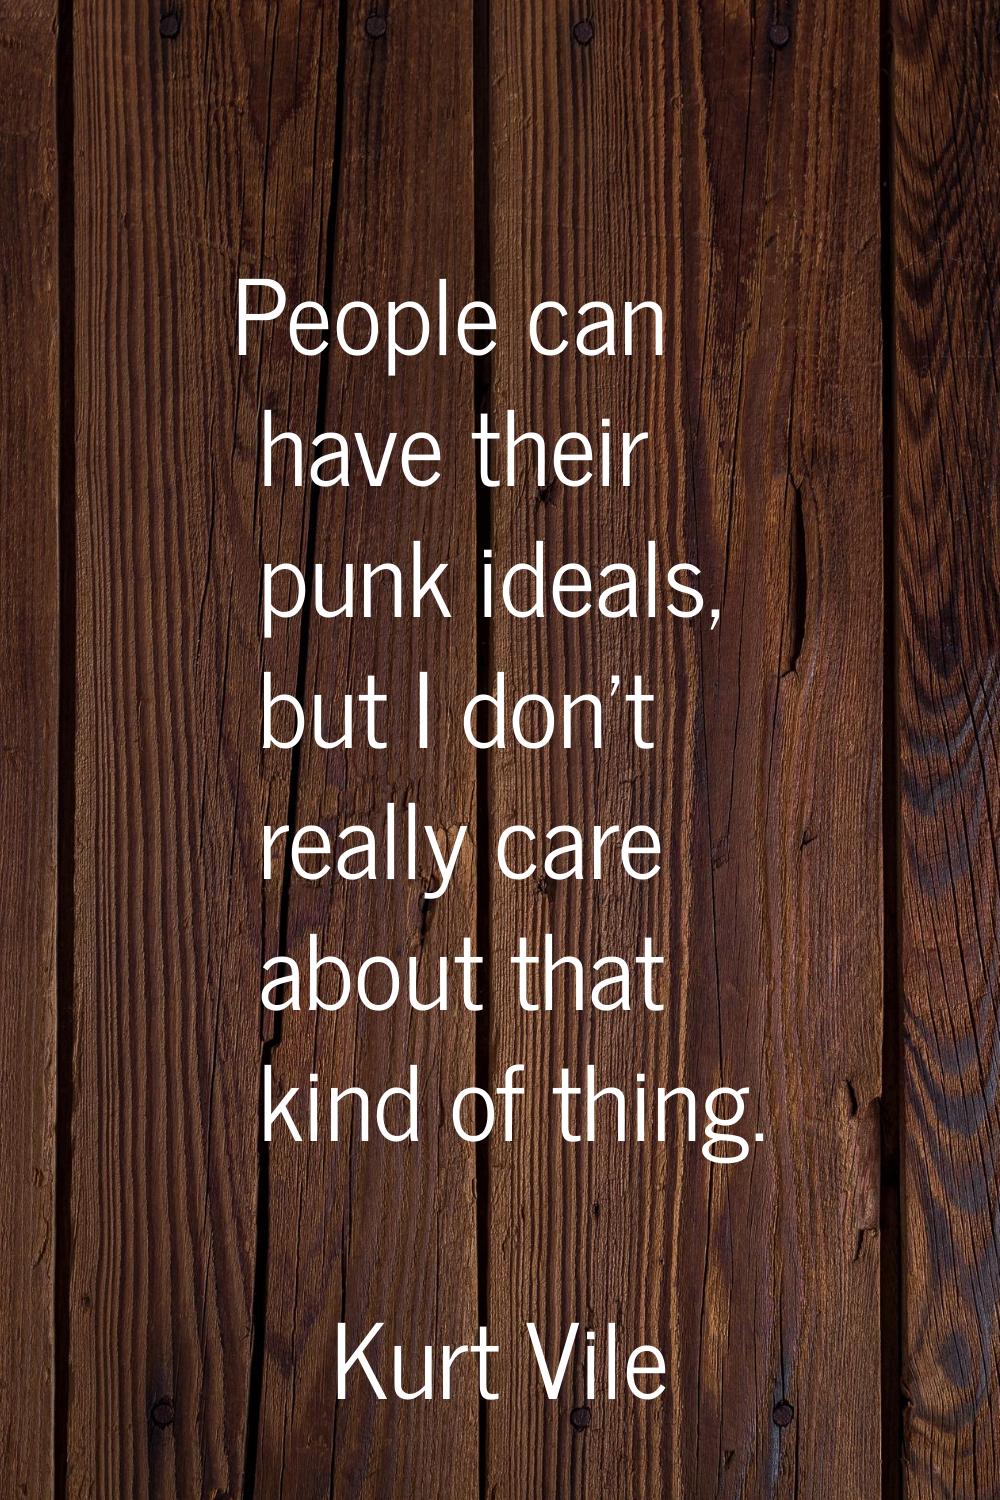 People can have their punk ideals, but I don't really care about that kind of thing.